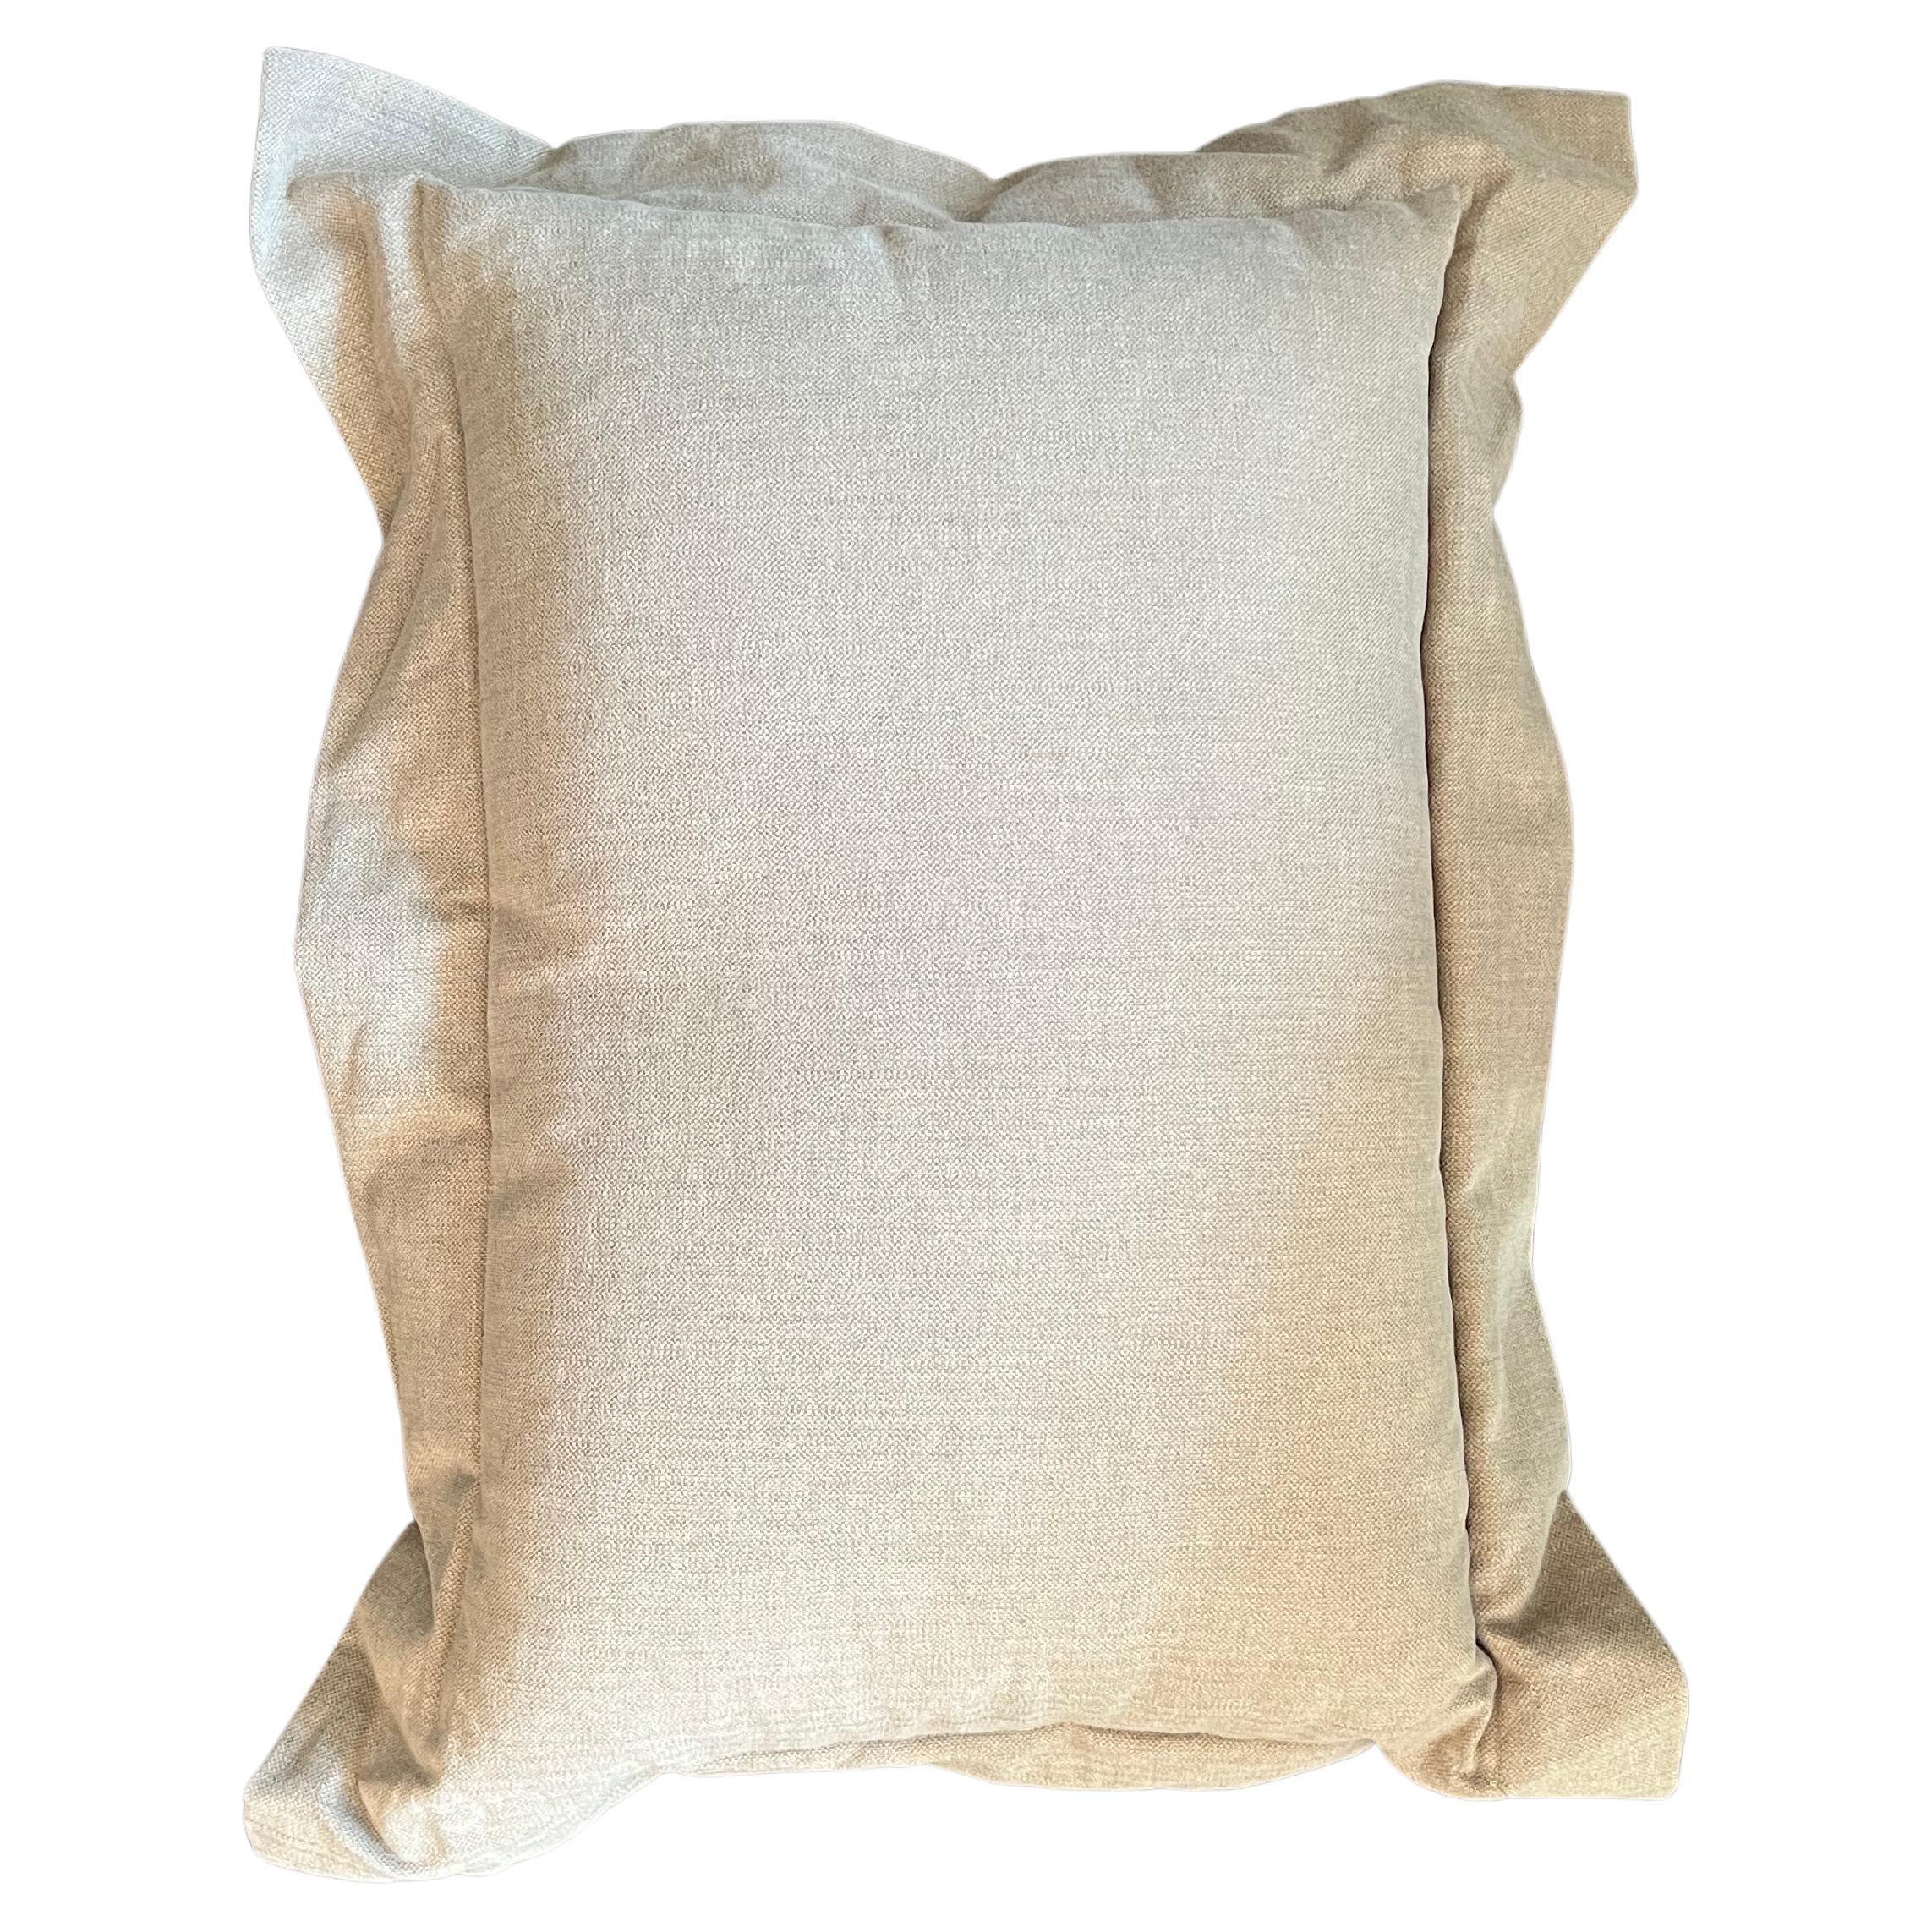 "Palermo" Handmade Linen/Cotton Pillow by Le Lampade For Sale